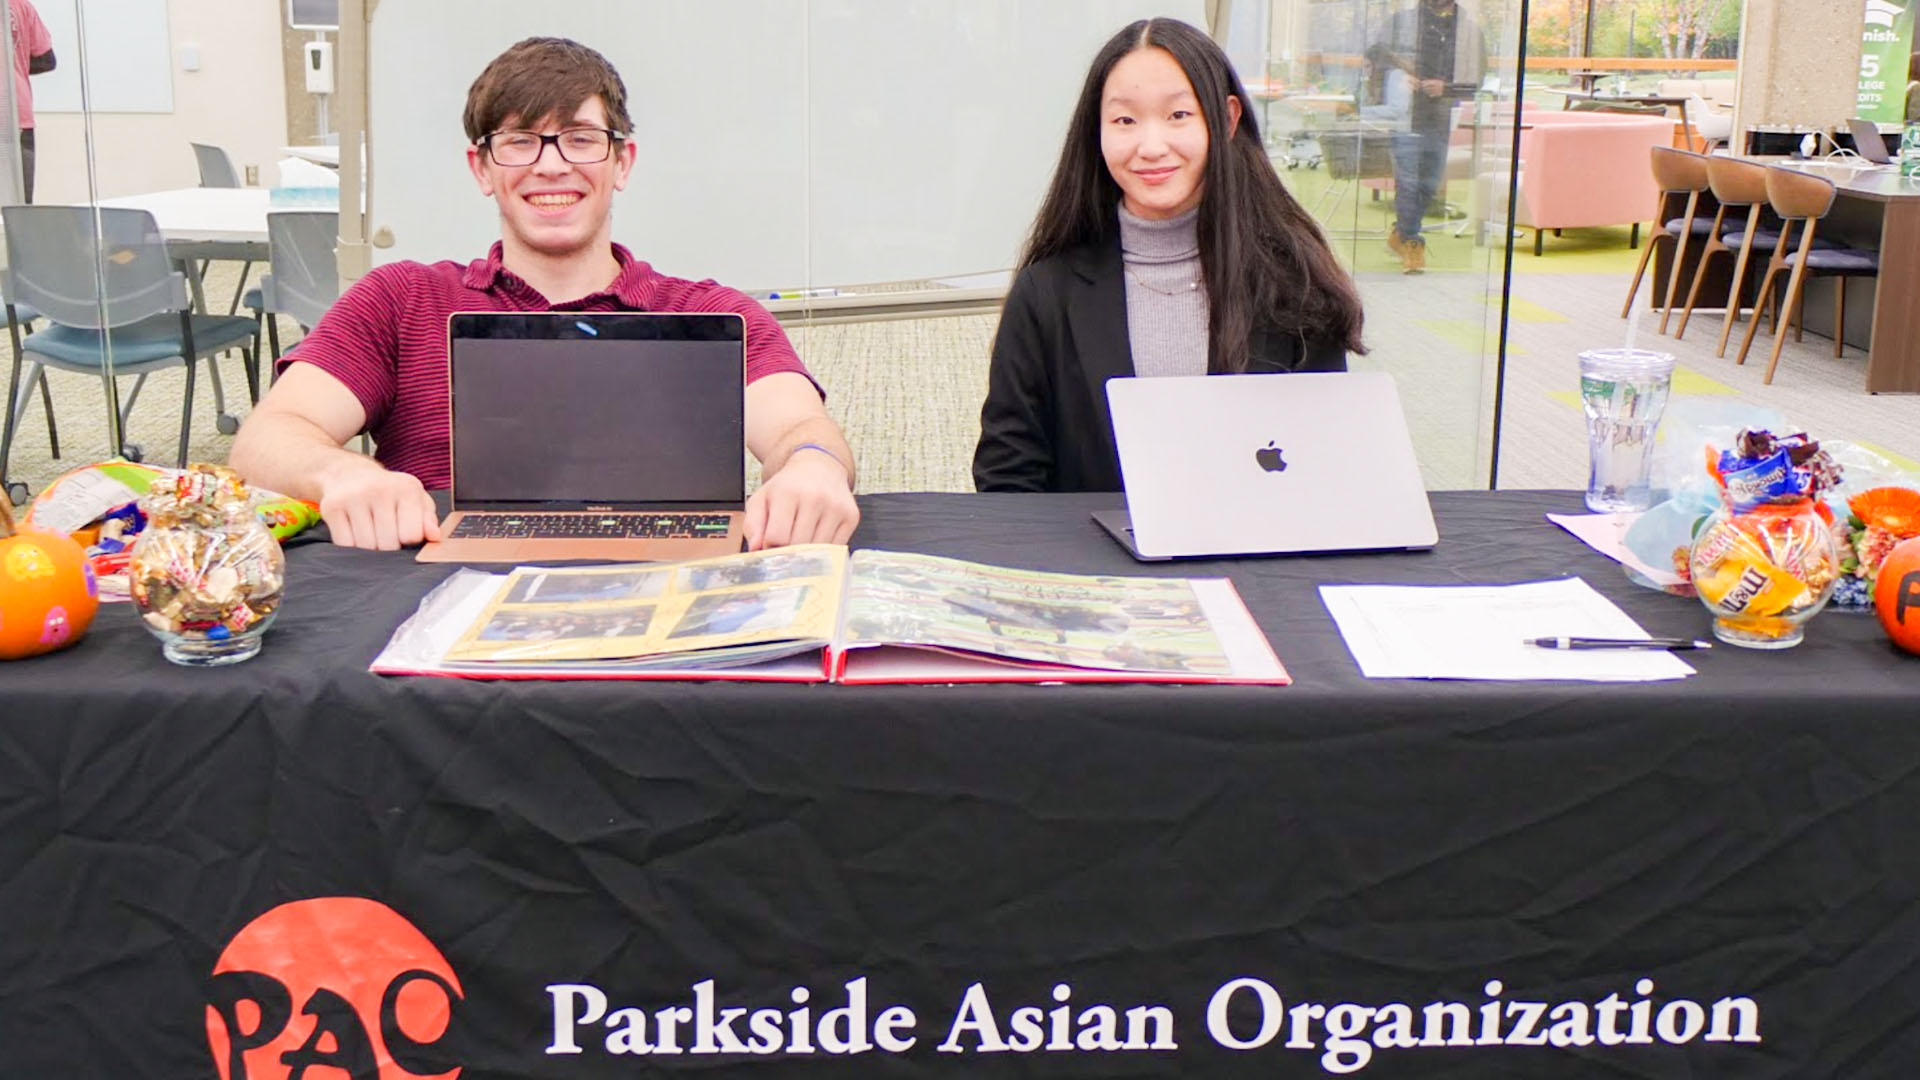 Members of the PAO, or the Parkside Asian Organization, gather to celebrate the memories they’ve created together during OMSA’s 40th anniversary.